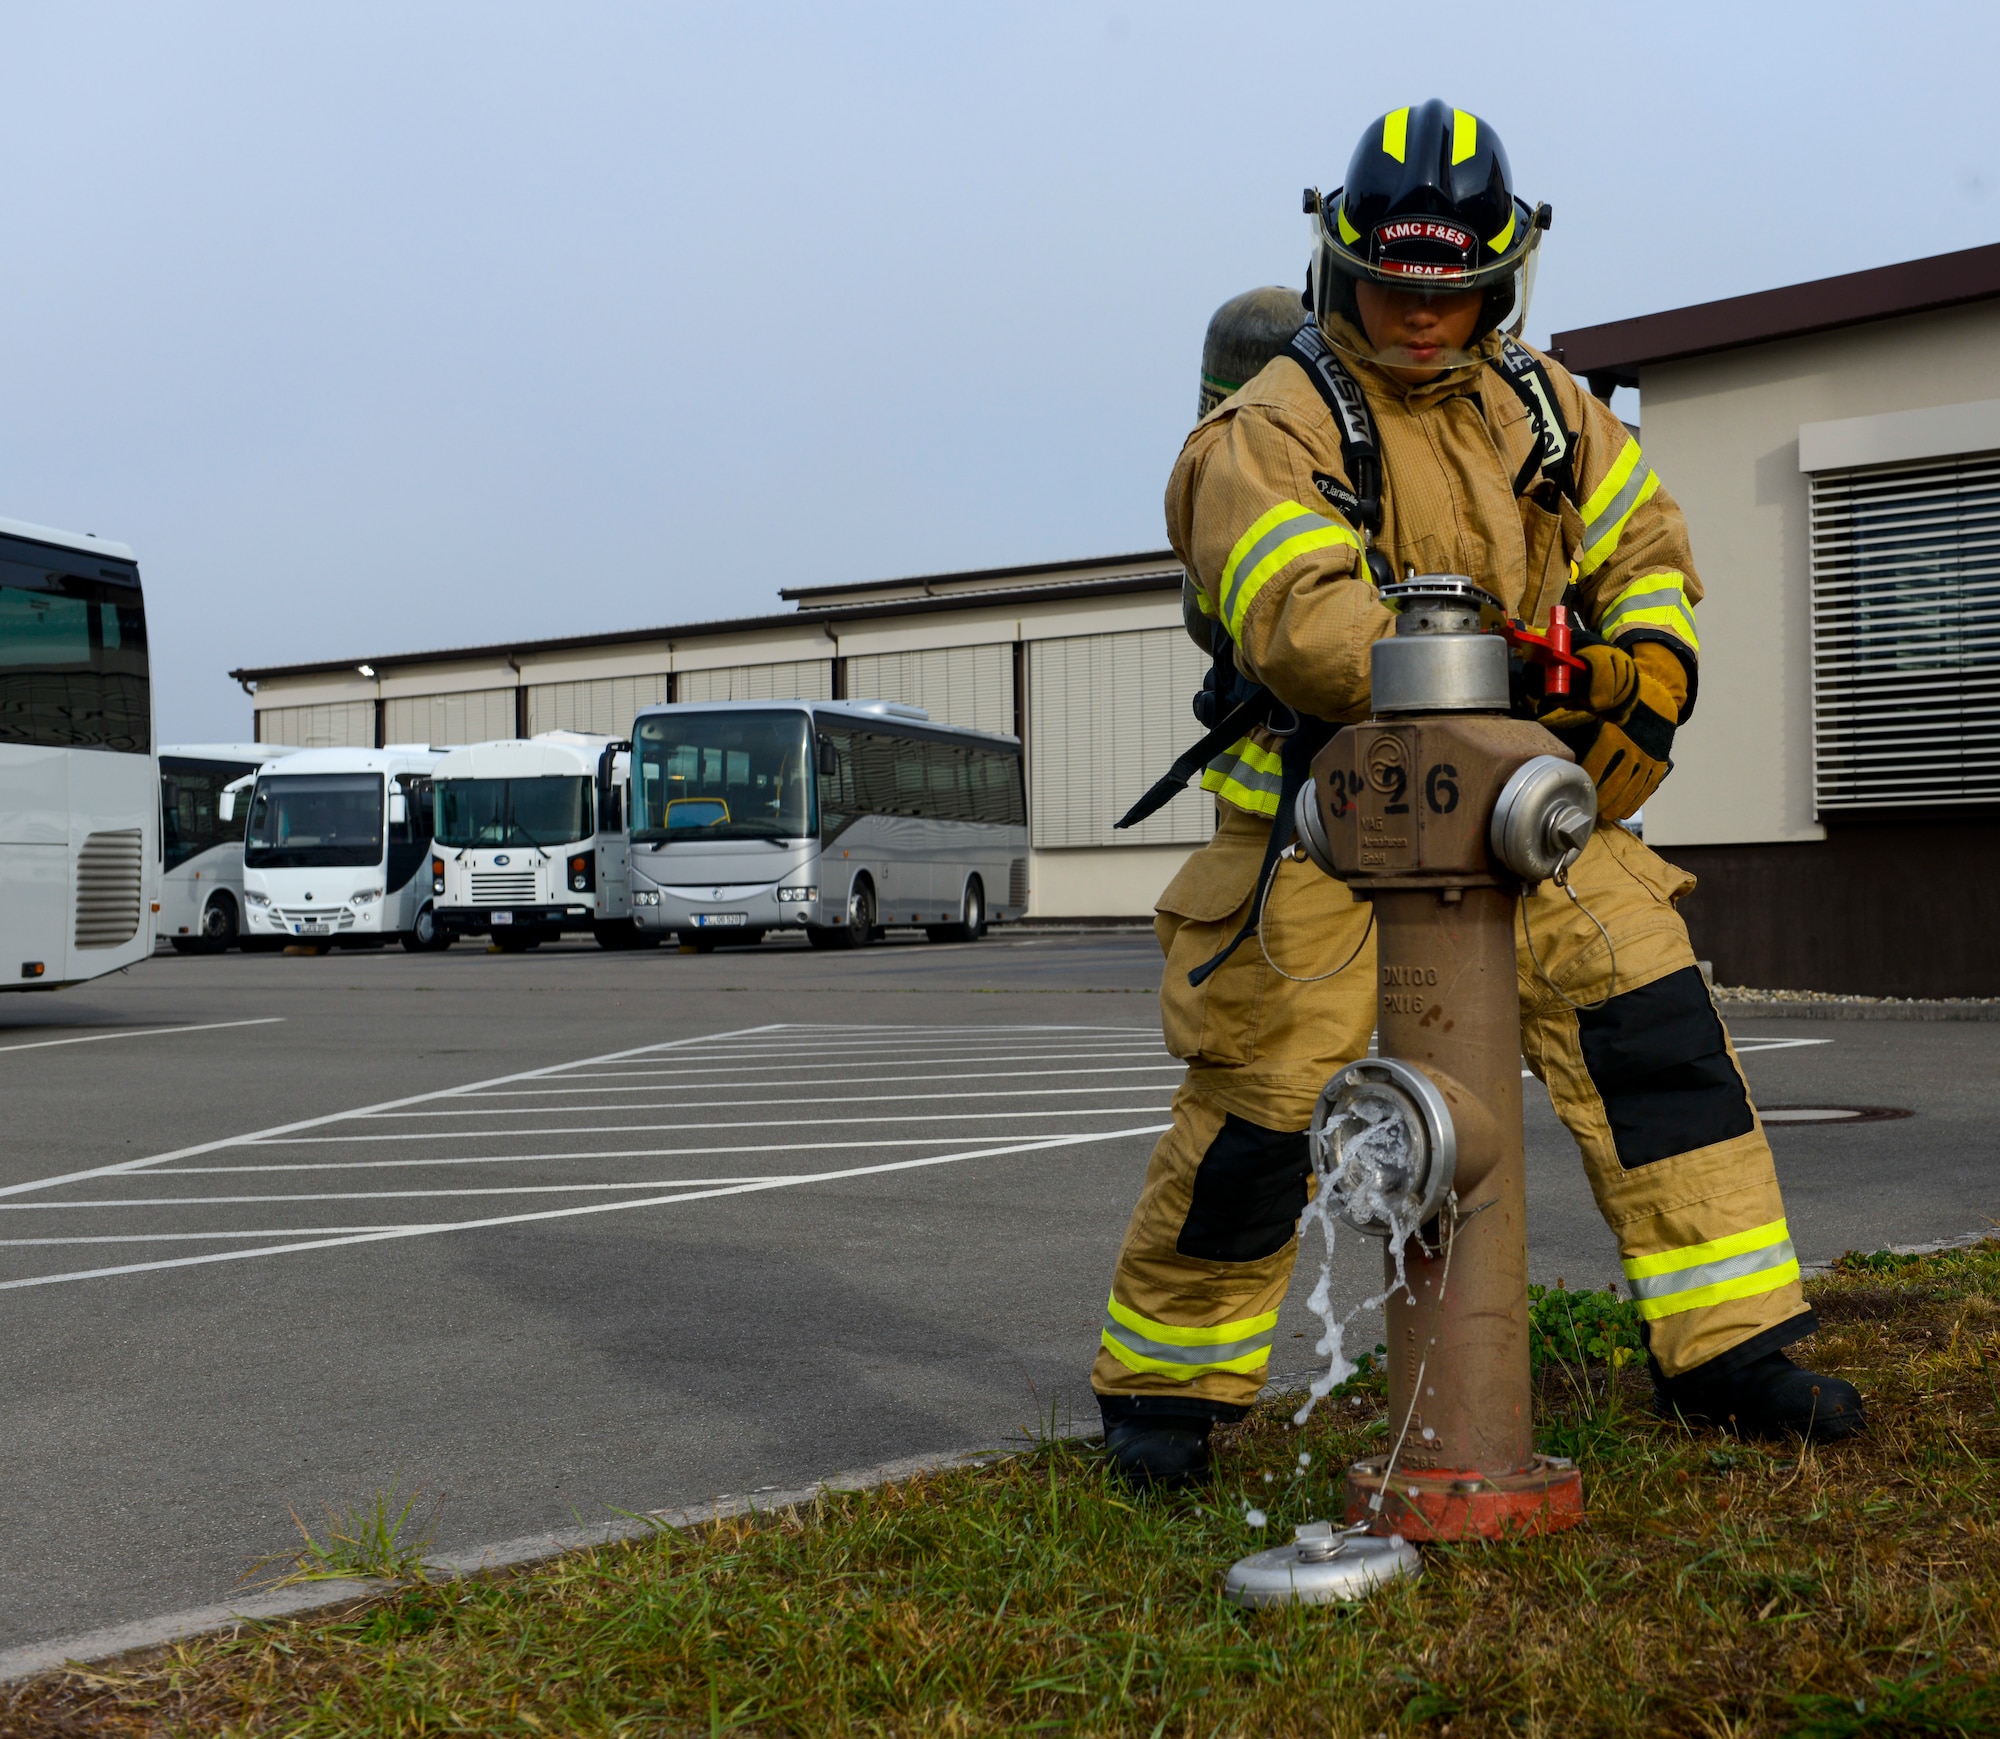 A U.S. Airman assigned to the 86th Civil Engineer Squadron releases water from a hydrant during a response to a simulated fire at Ramstein Air Base, Germany, Sept. 24, 2019. The simulated fire was an exercise inject for Operation Varsity 19-03, a weeklong exercise designed to test the capabilities of Ramstein Airmen. (U.S. Air Force photo by Tech. Sgt. Timothy Moore)